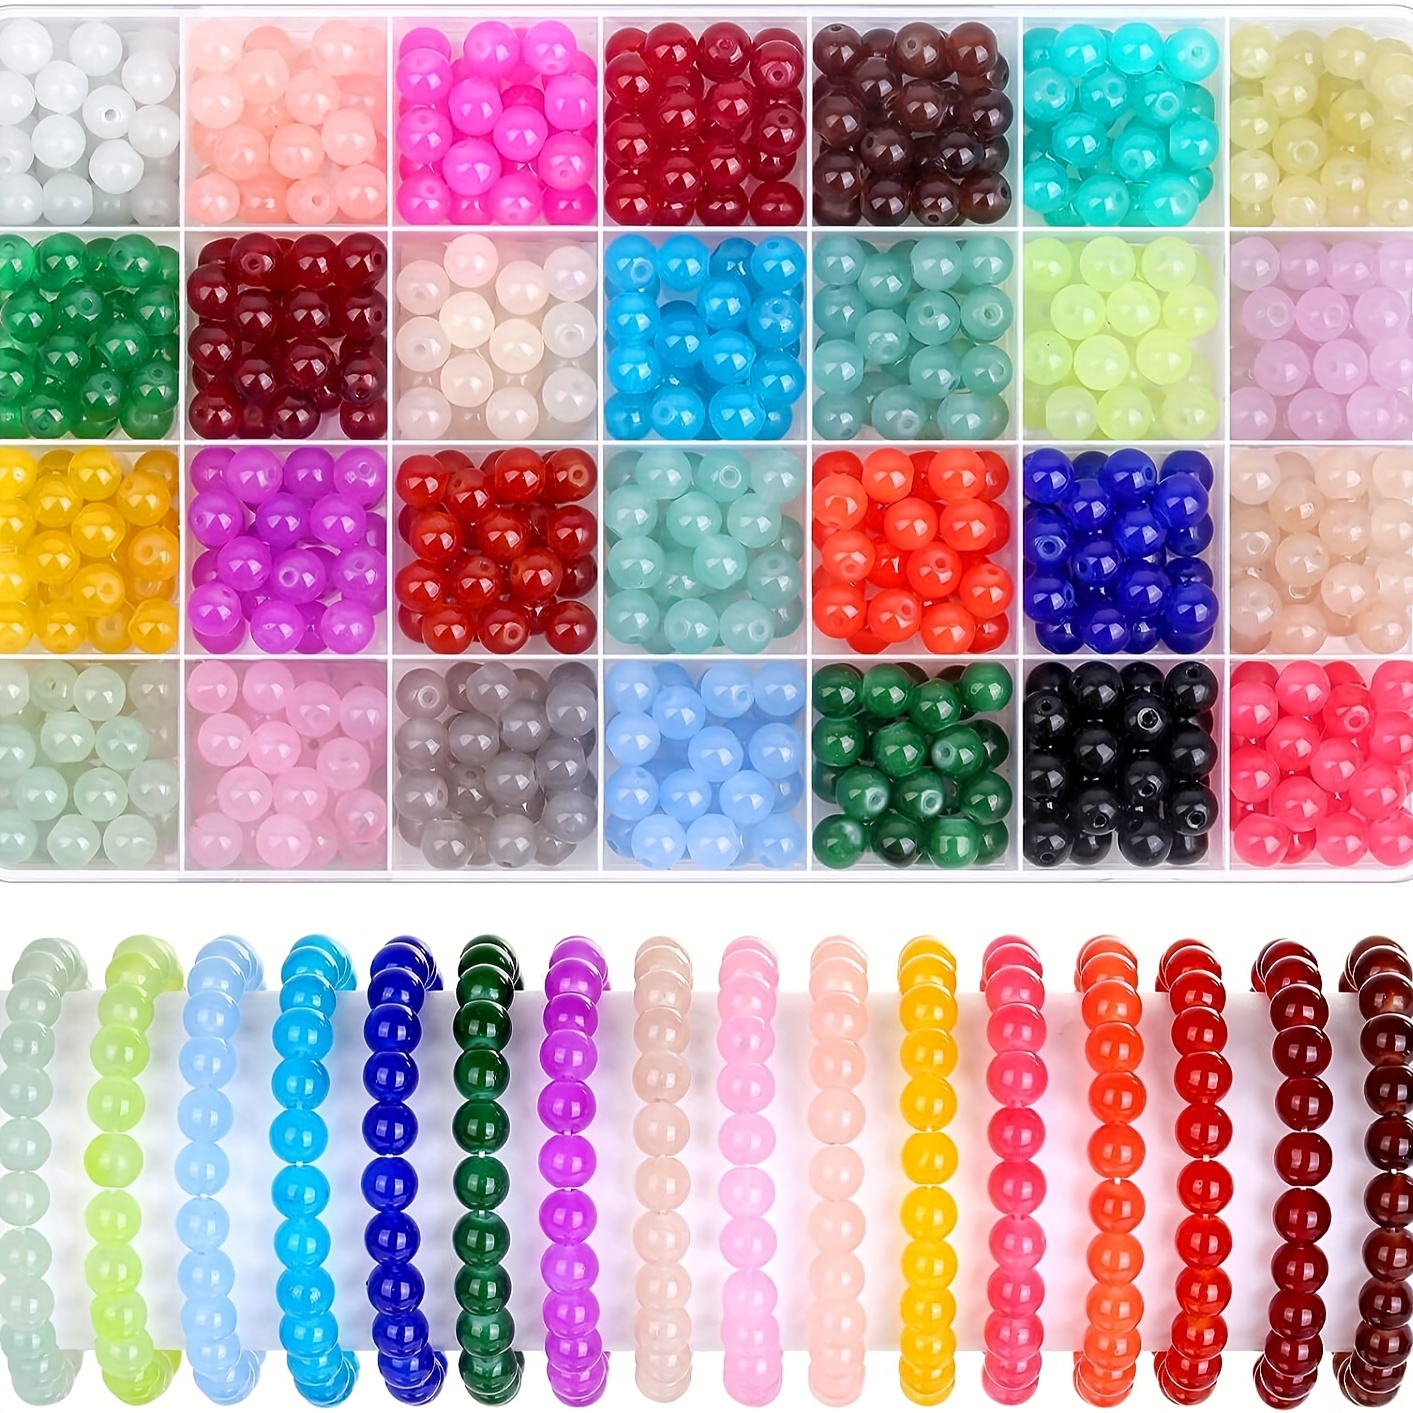 Glass Beads for Jewelry Making Kit, 8MM Imitating Natural Jade Bracelets  Beads Kit - with Jump Rings